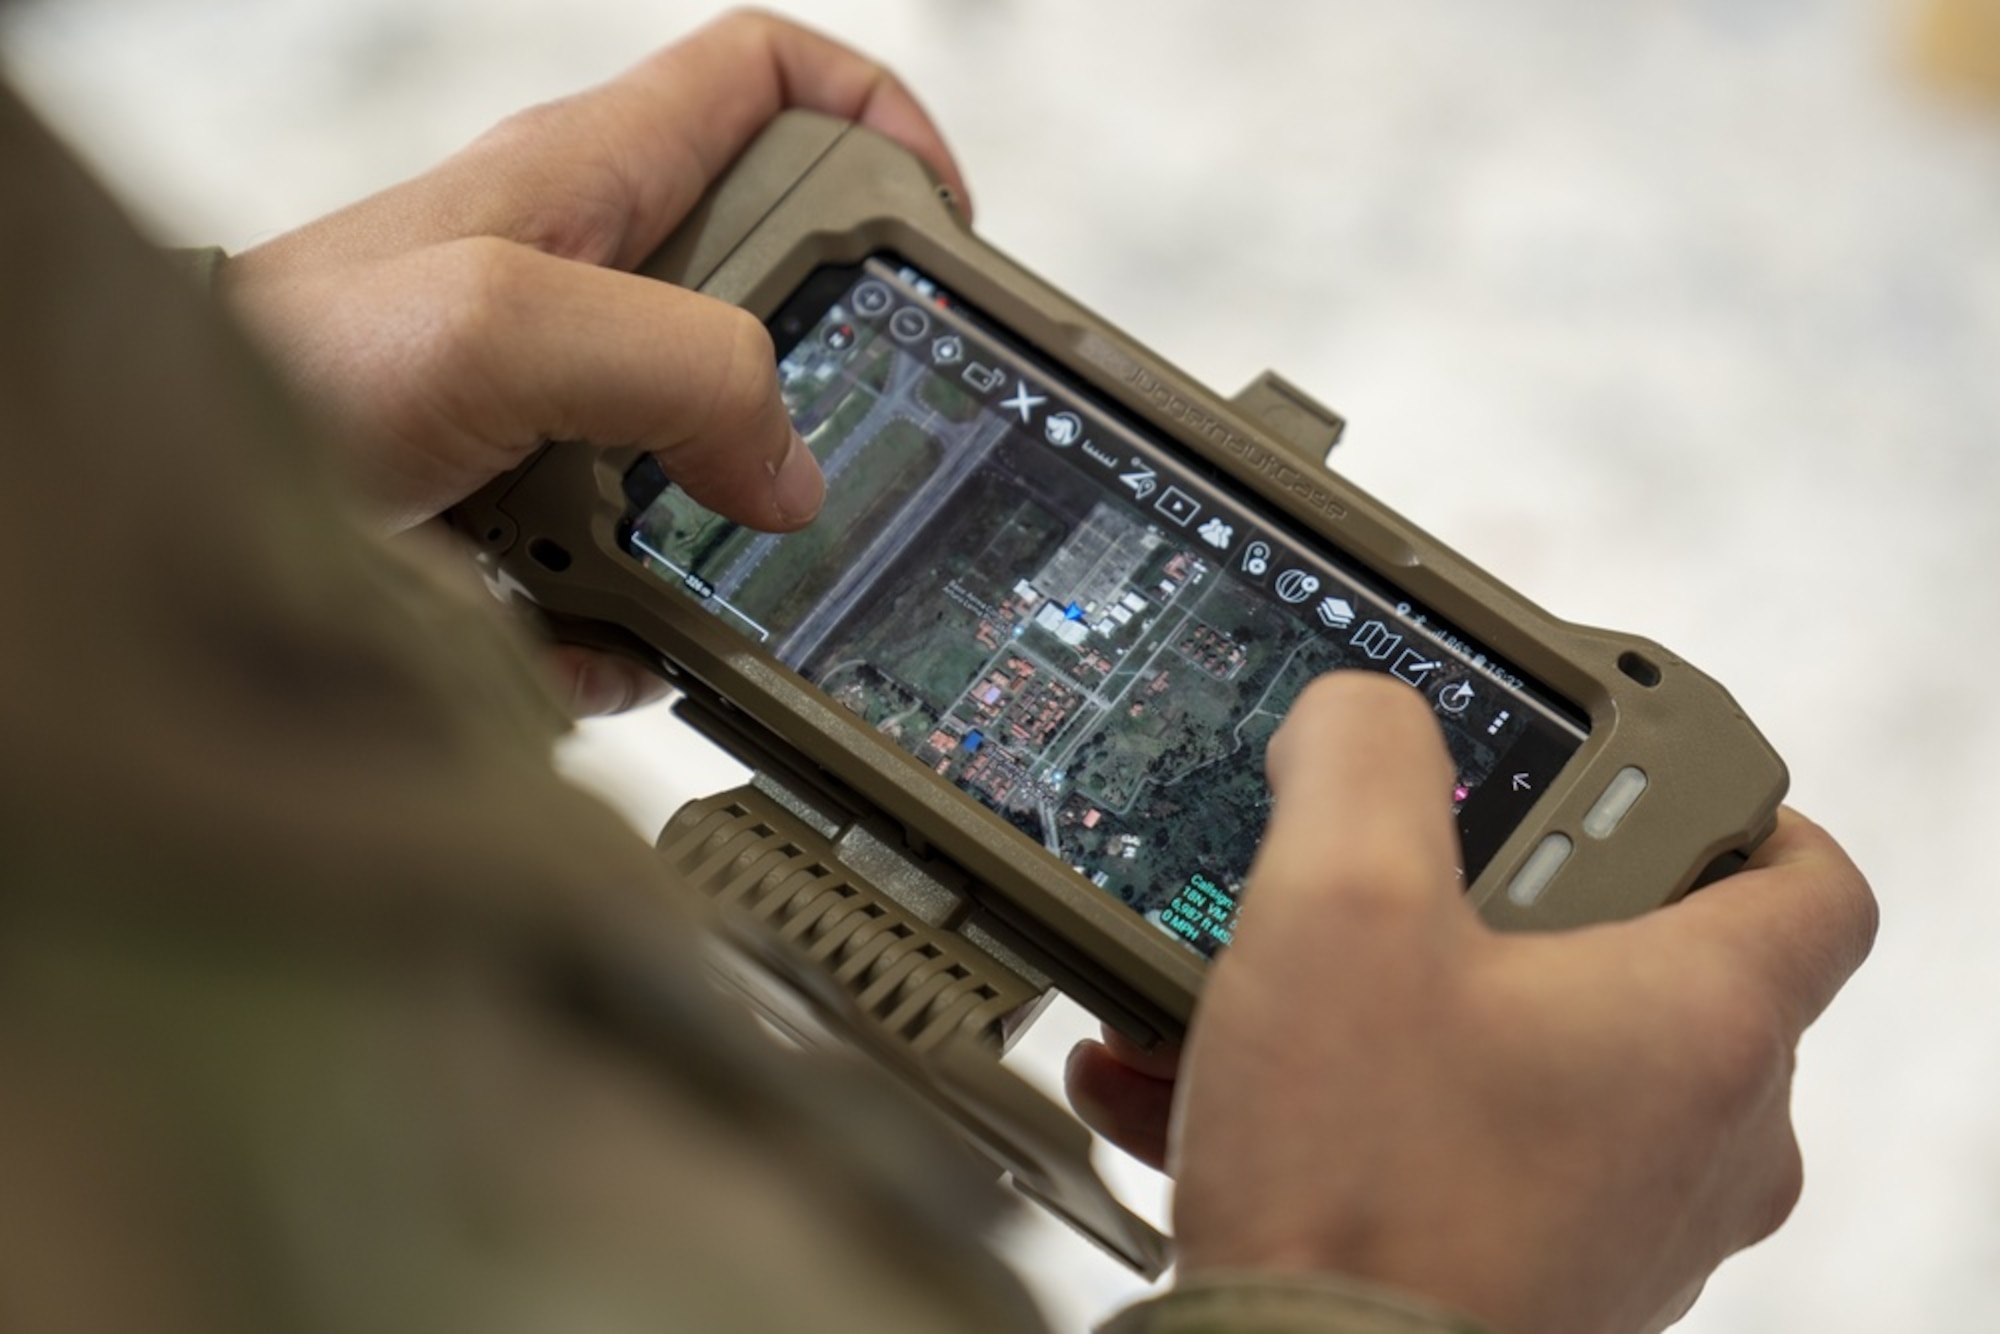 A cell phone linked to the AERONet system displays the real-time locations of personnel, vehicles, and aircraft during the Ángel de los Andes exercise outside of Rionegro, Colombia, in September 2021. Operated by the Quick Reaction Capability Branch at Hanscom Air Force Base, Mass., AERONet is an affordable and commercially secure combat system capable of providing video, voice, chat, and position data to partner nations for under $500,000.